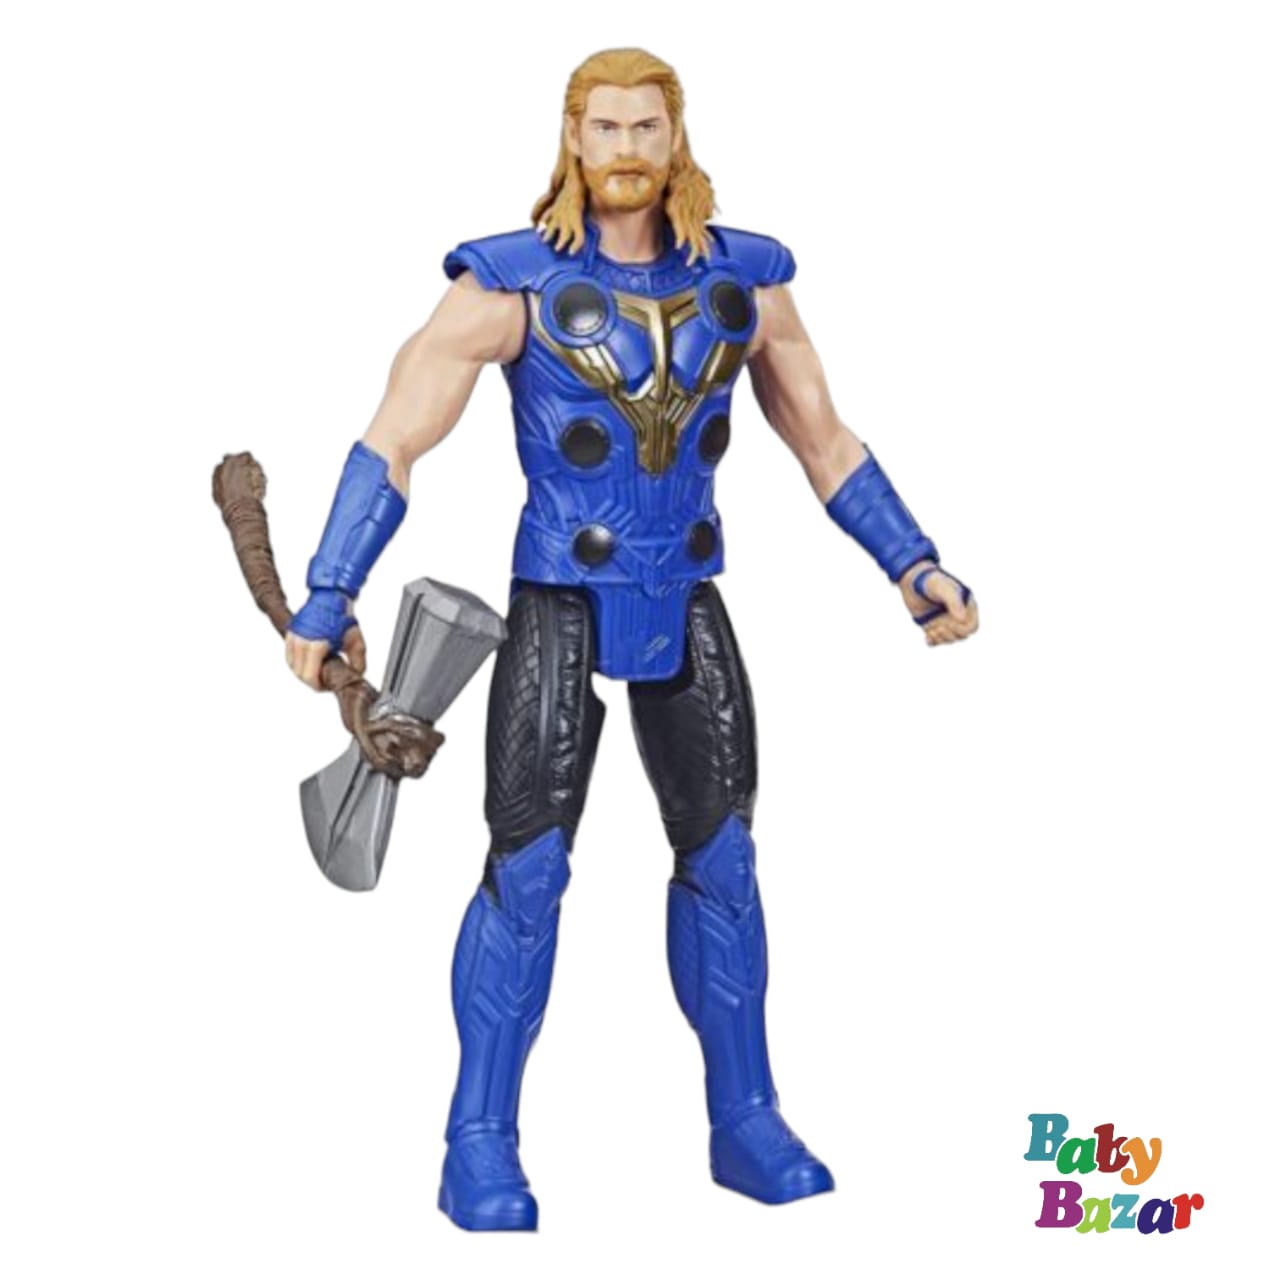 Avengers Thor Action Figure Infinity war Toy, 12 Inches, Age 4 Years & Up (Battery Operated)  (Black, Grey)